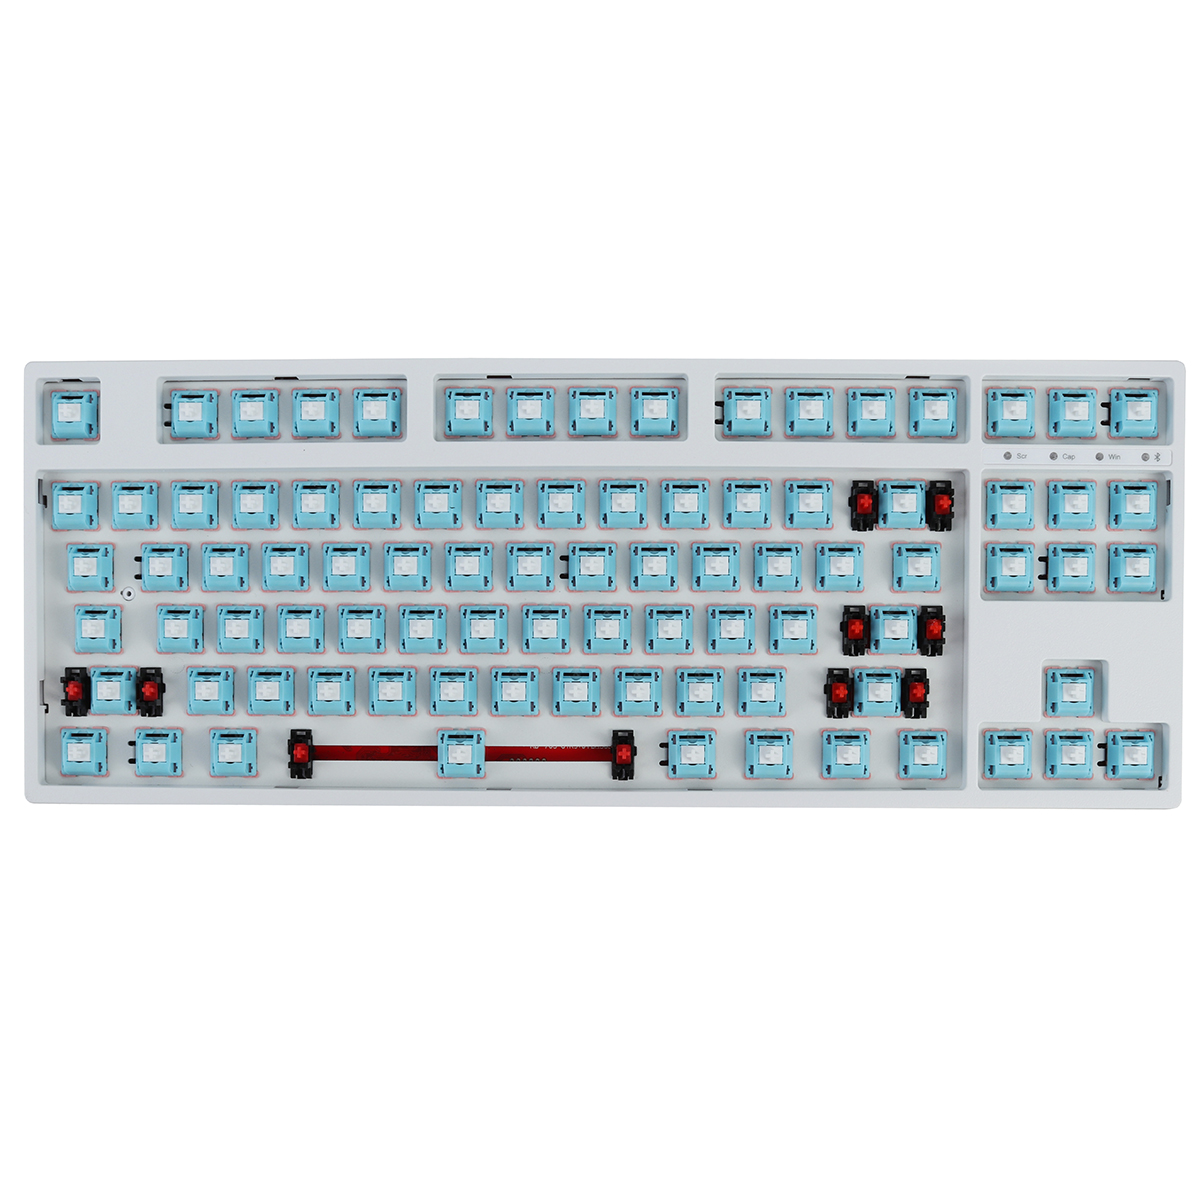 FEKER-87-Keys-Customized-Keyboard-Kit-Hotswappable-24G-bluetooth-RGB-Backlight-Frosted-ABS-Case-DIY--1876697-11